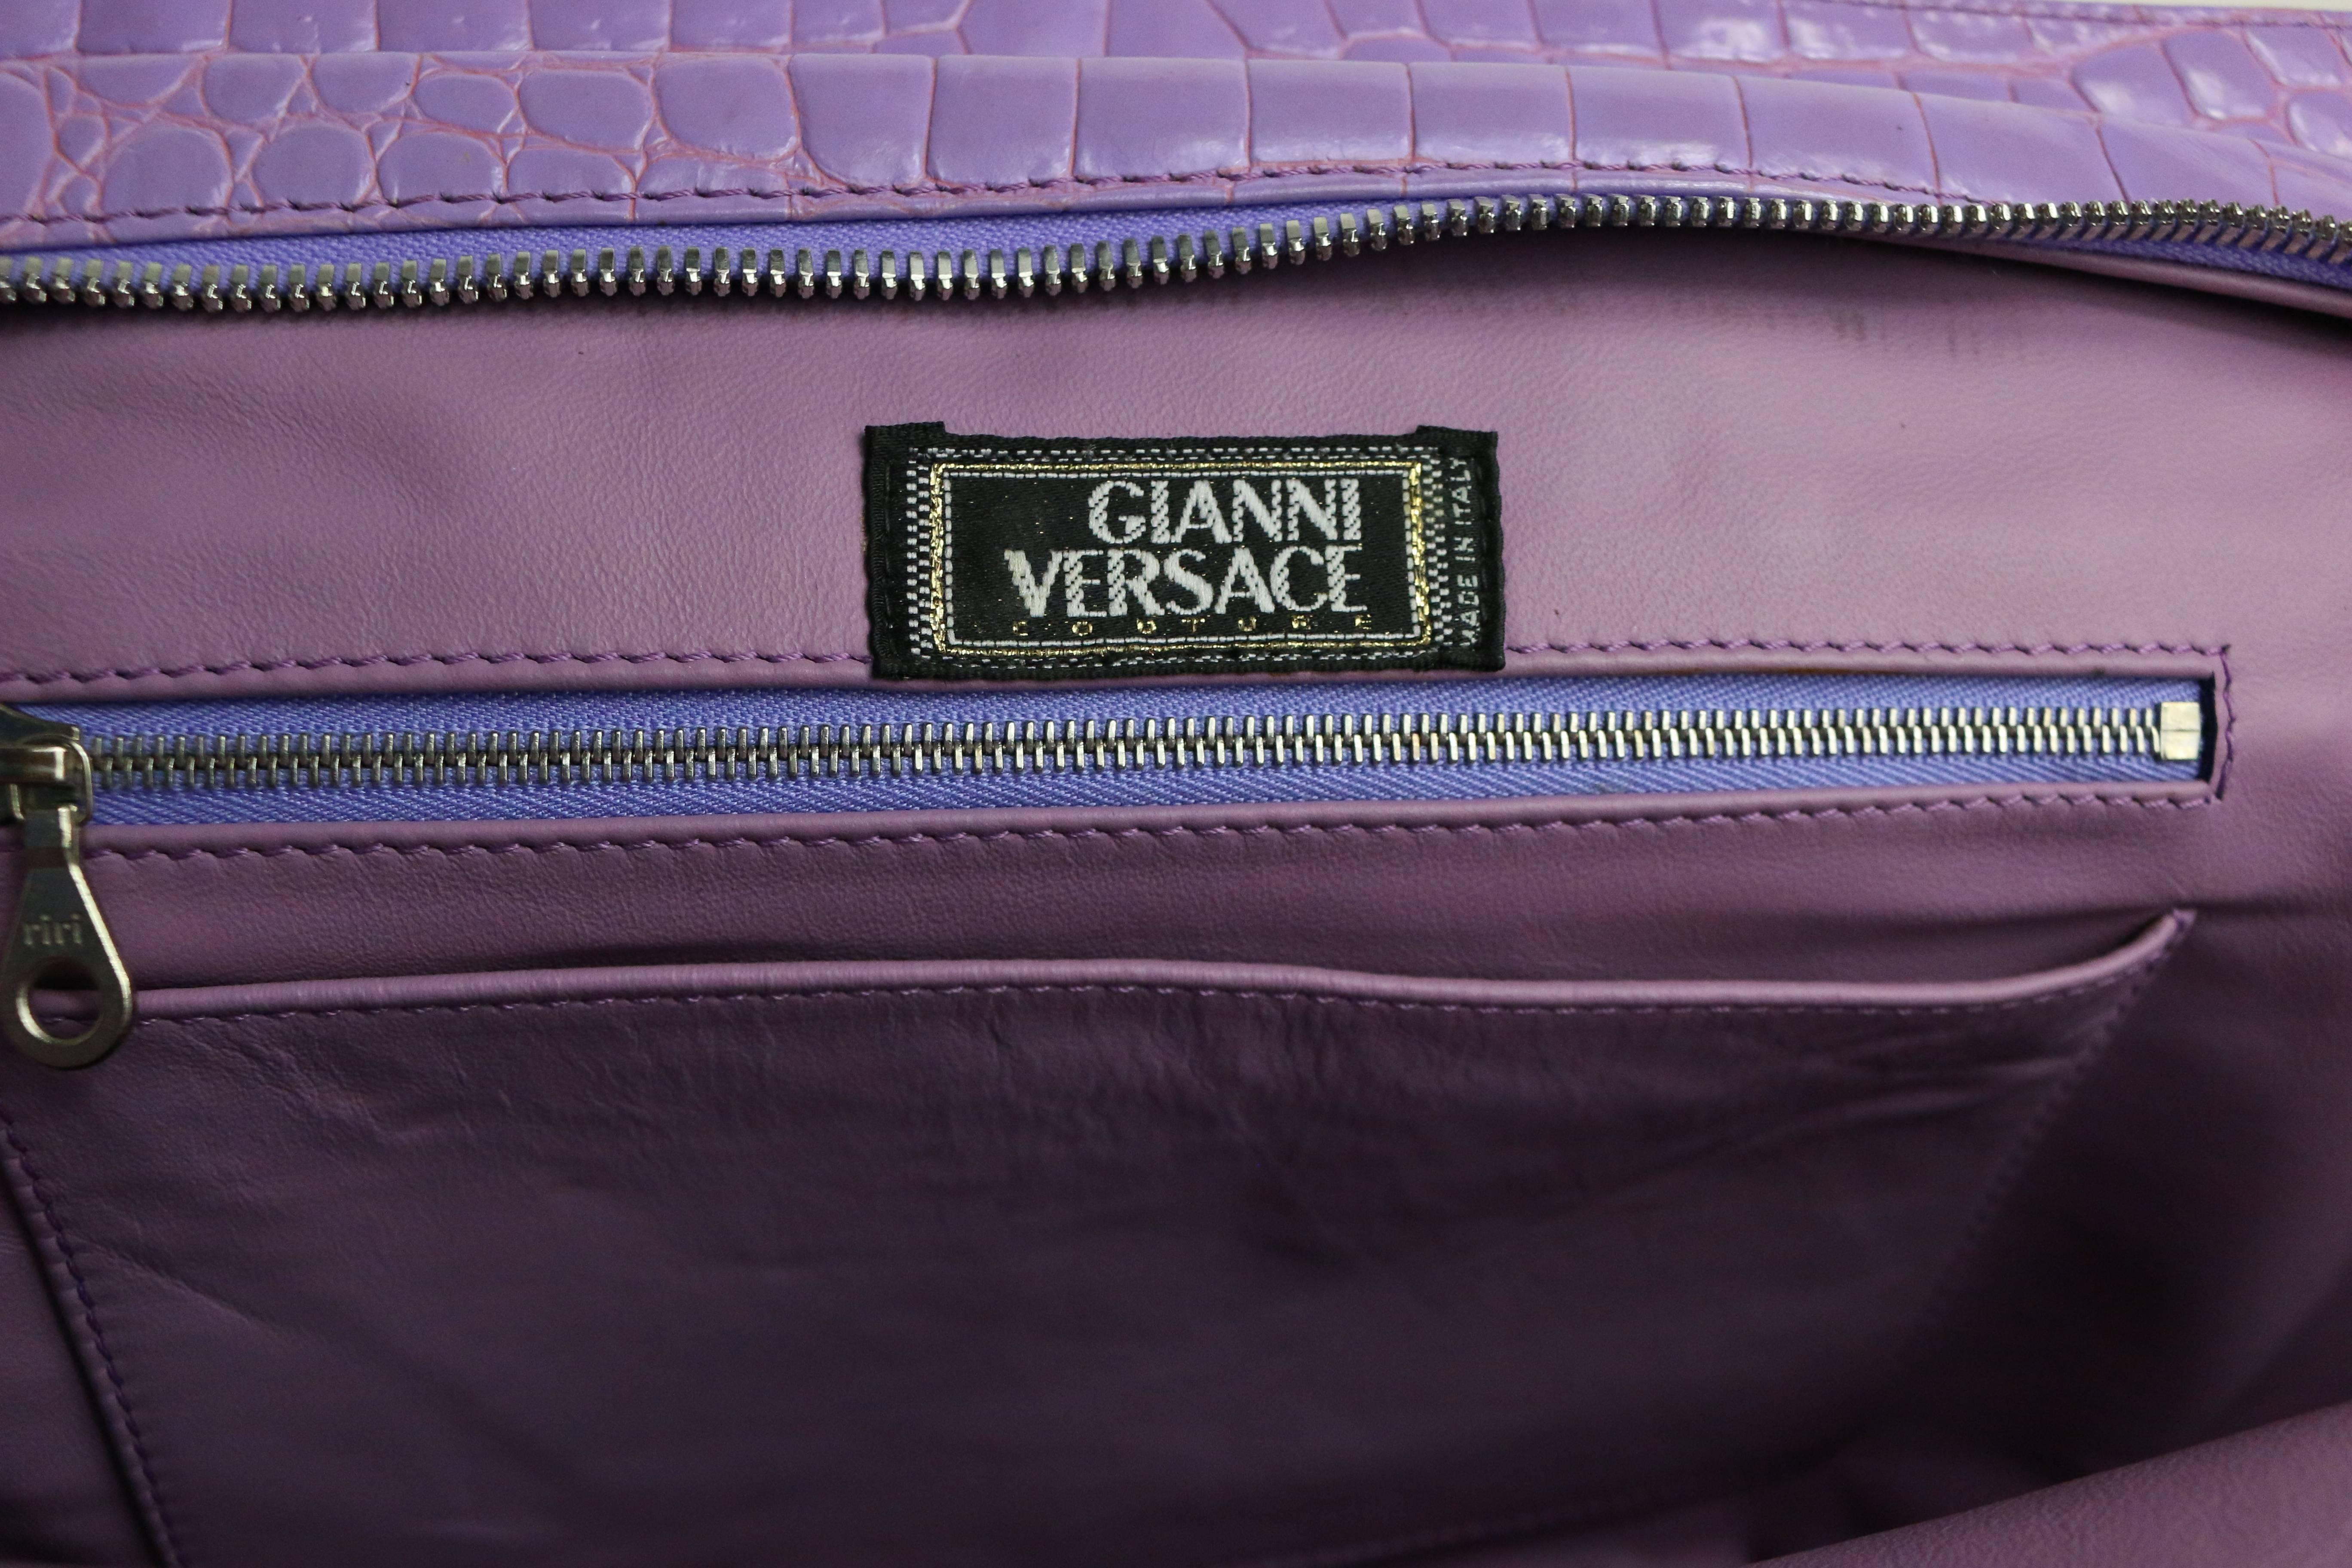 Gianni Versace Couture Purple Croc Embossed Enamel Leather Handbag In Excellent Condition For Sale In Sheung Wan, HK